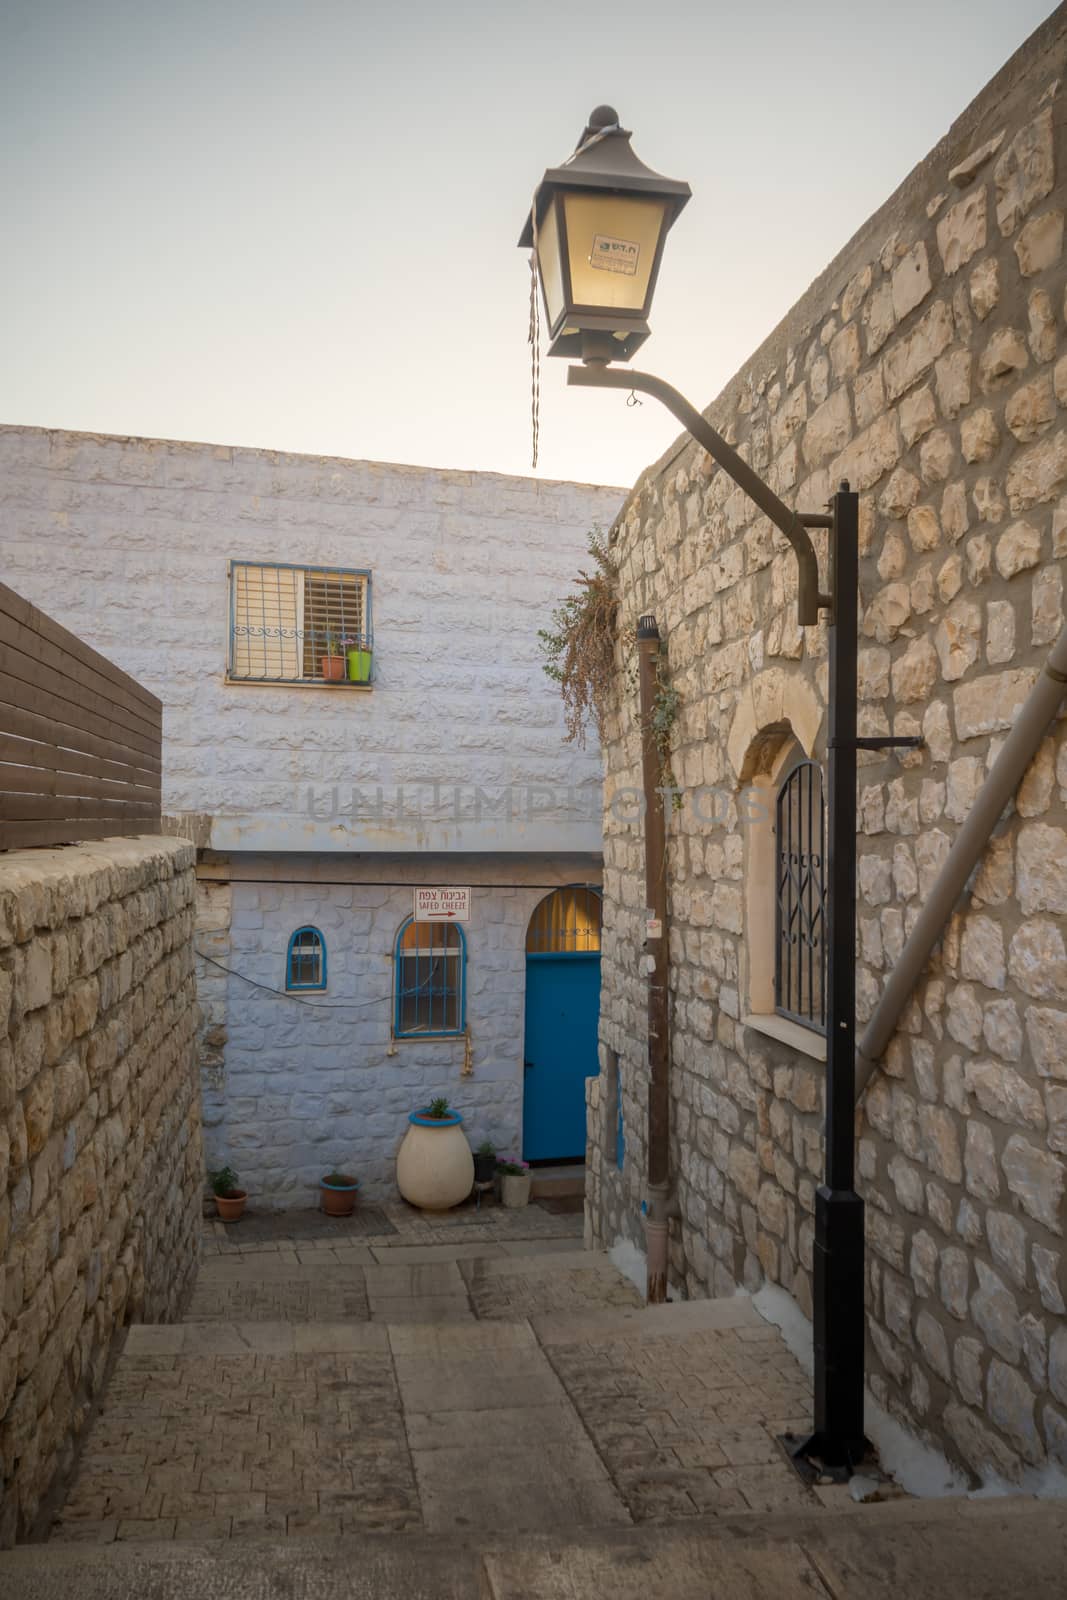 Alley with various signs, in Safed (Tzfat) by RnDmS